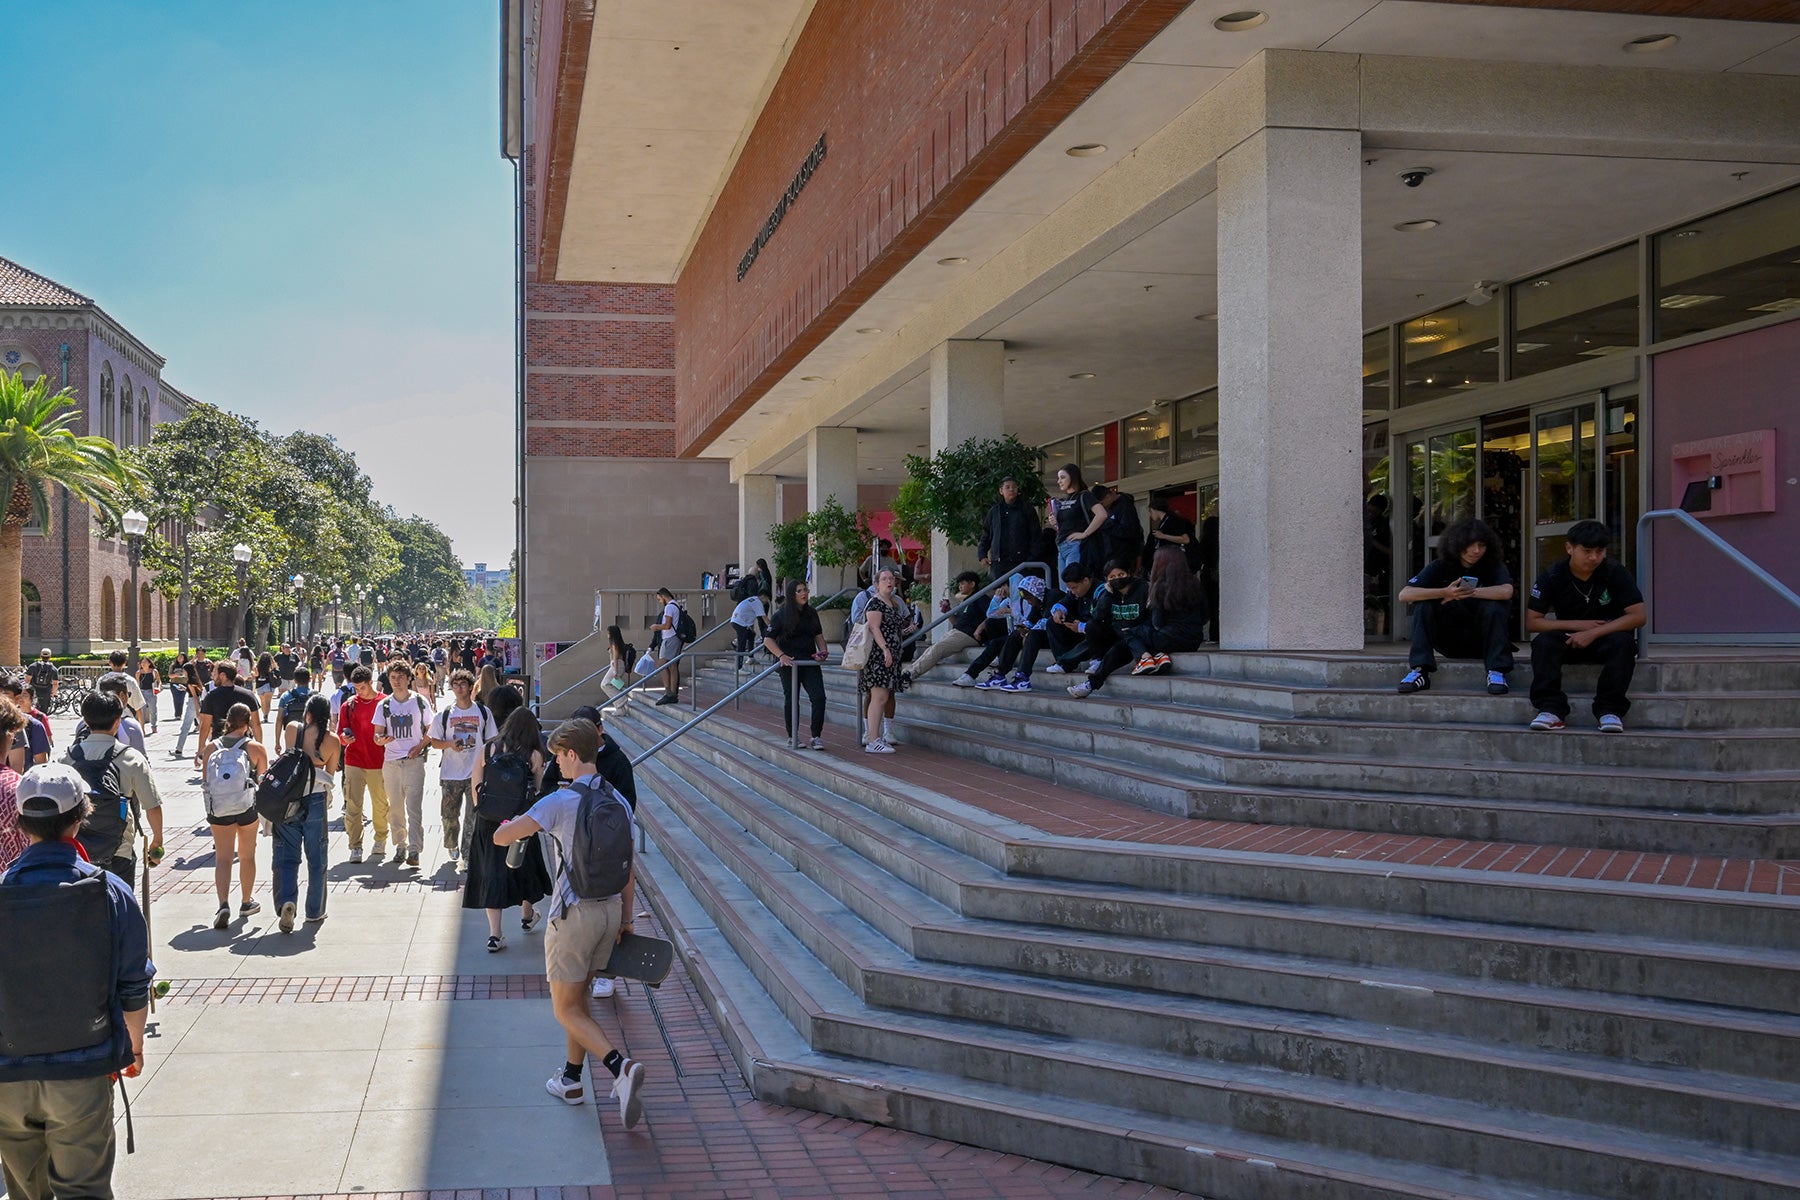 USC campus photos: Bookstore steps are crowded